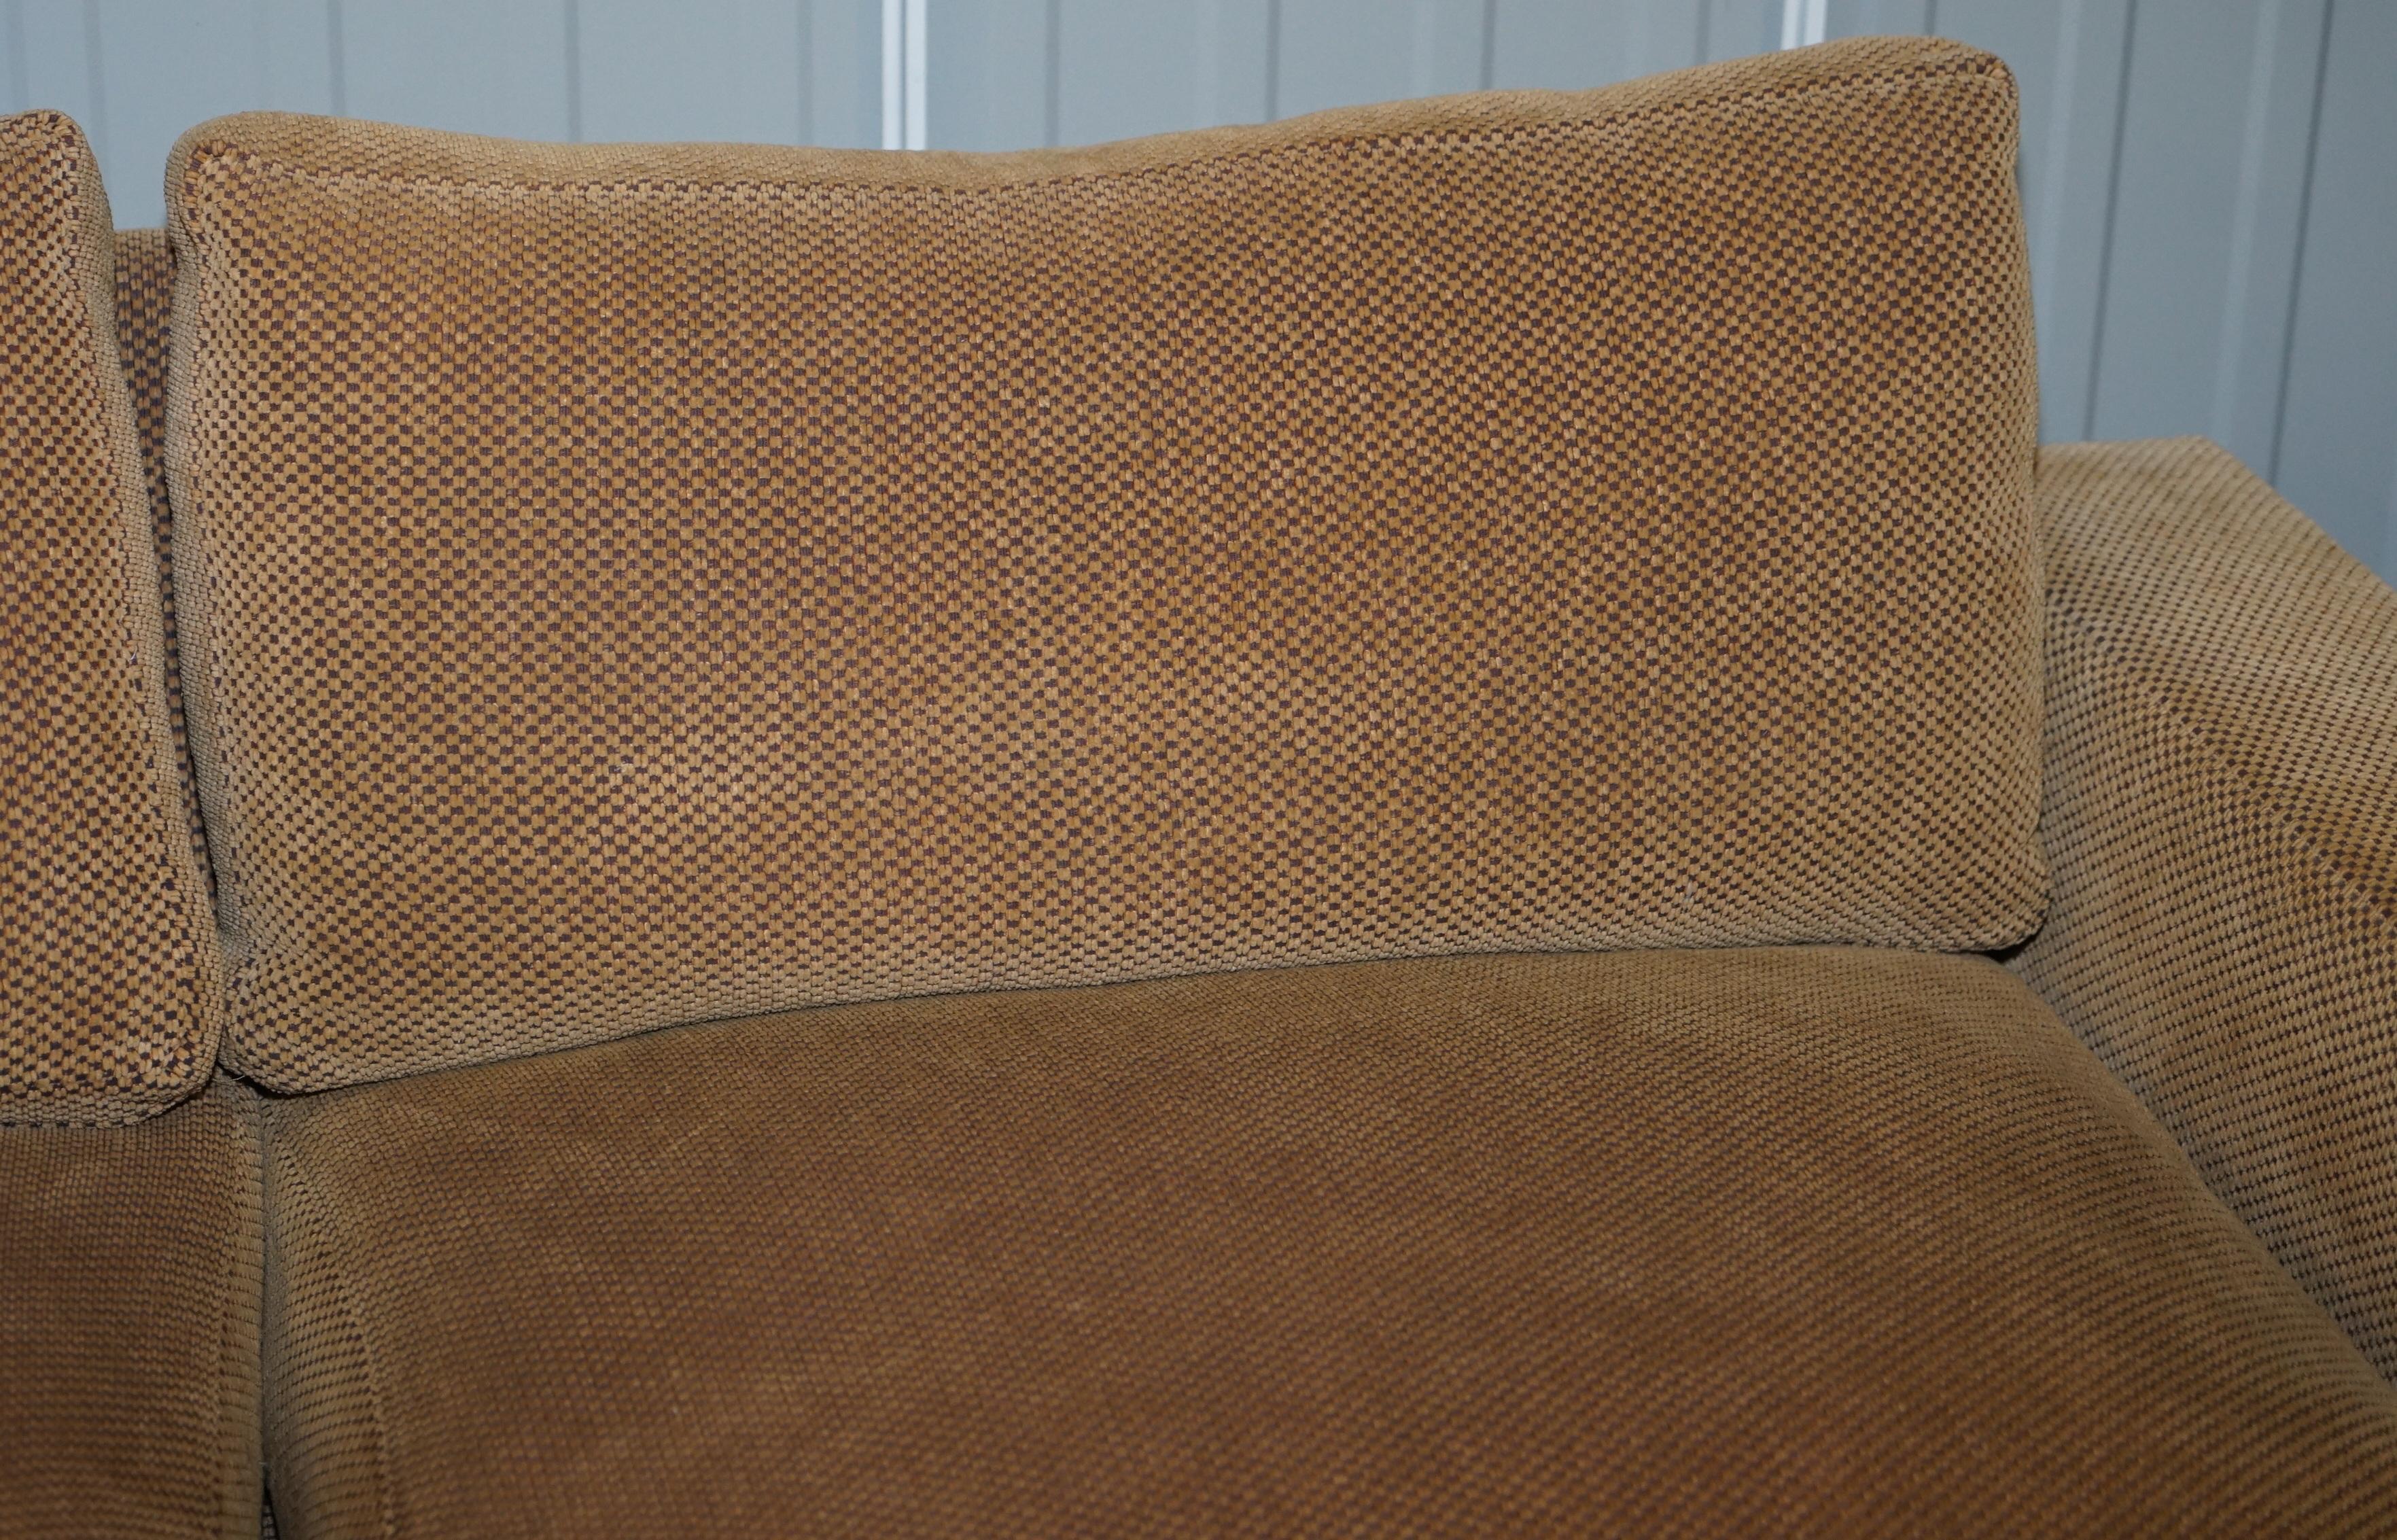 Upholstery 1 of 2 George Smith Signature Square Arm Sofa Feather Filled Cushions